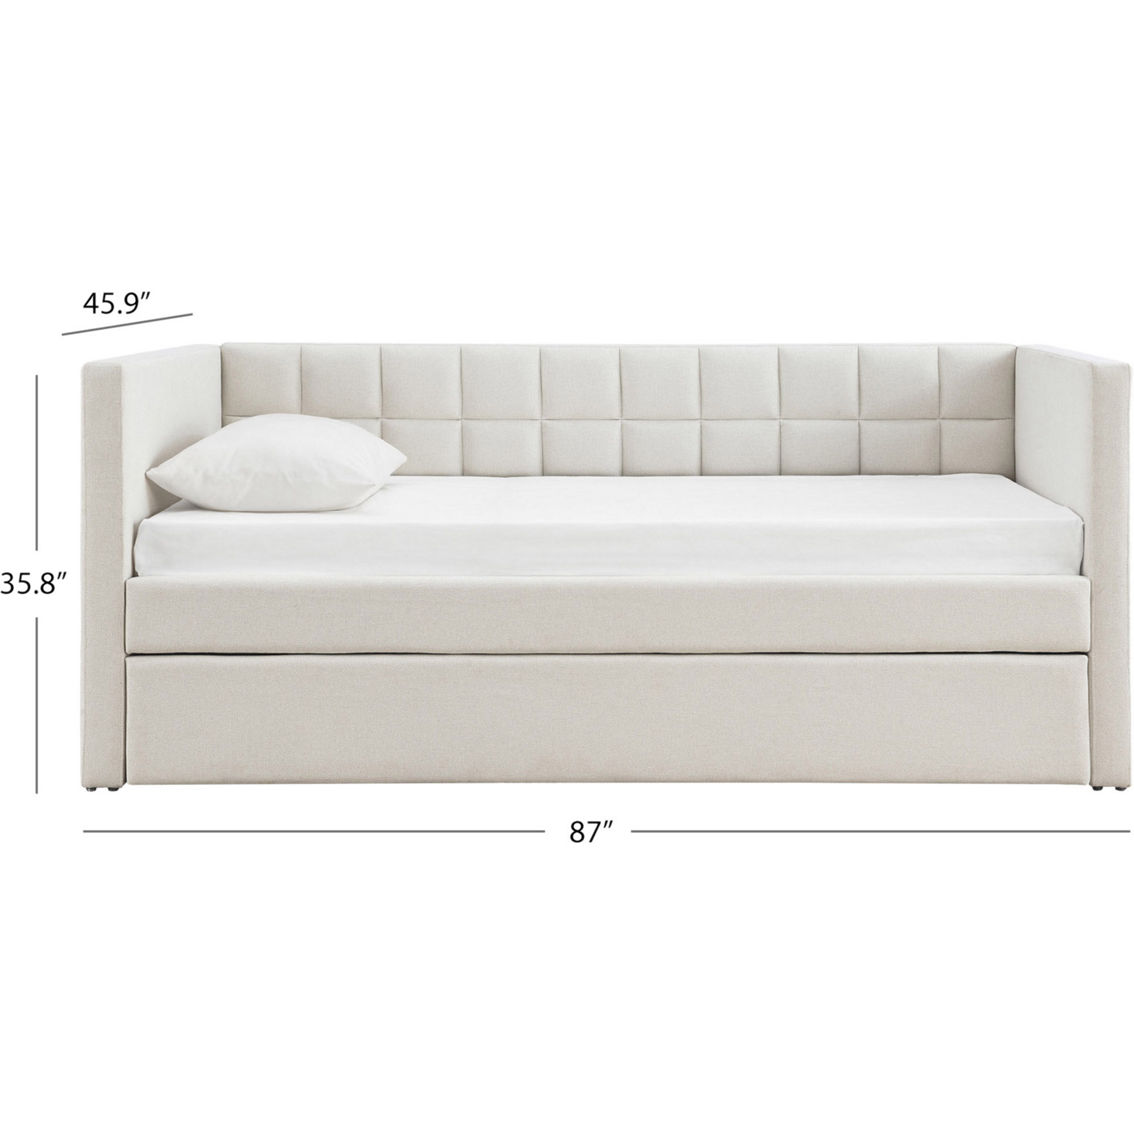 Abbyson Aveline Upholstered Twin Daybed with Trundle - Image 8 of 8